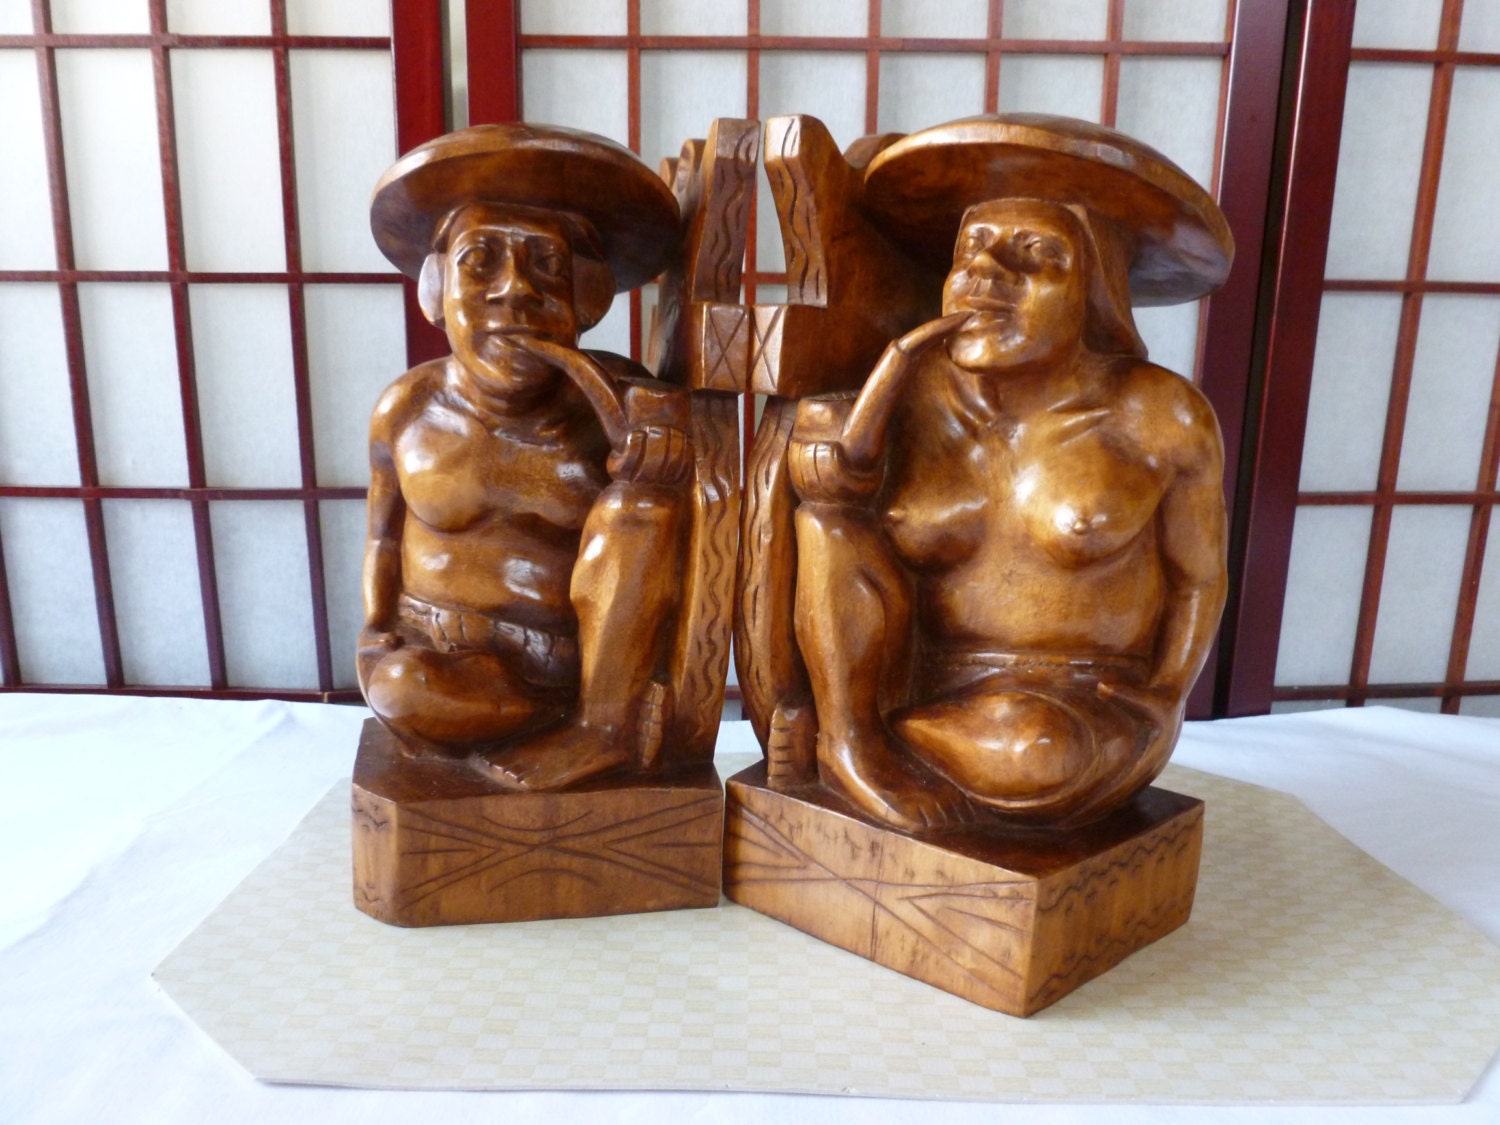 philippines hand carved wooden bookends